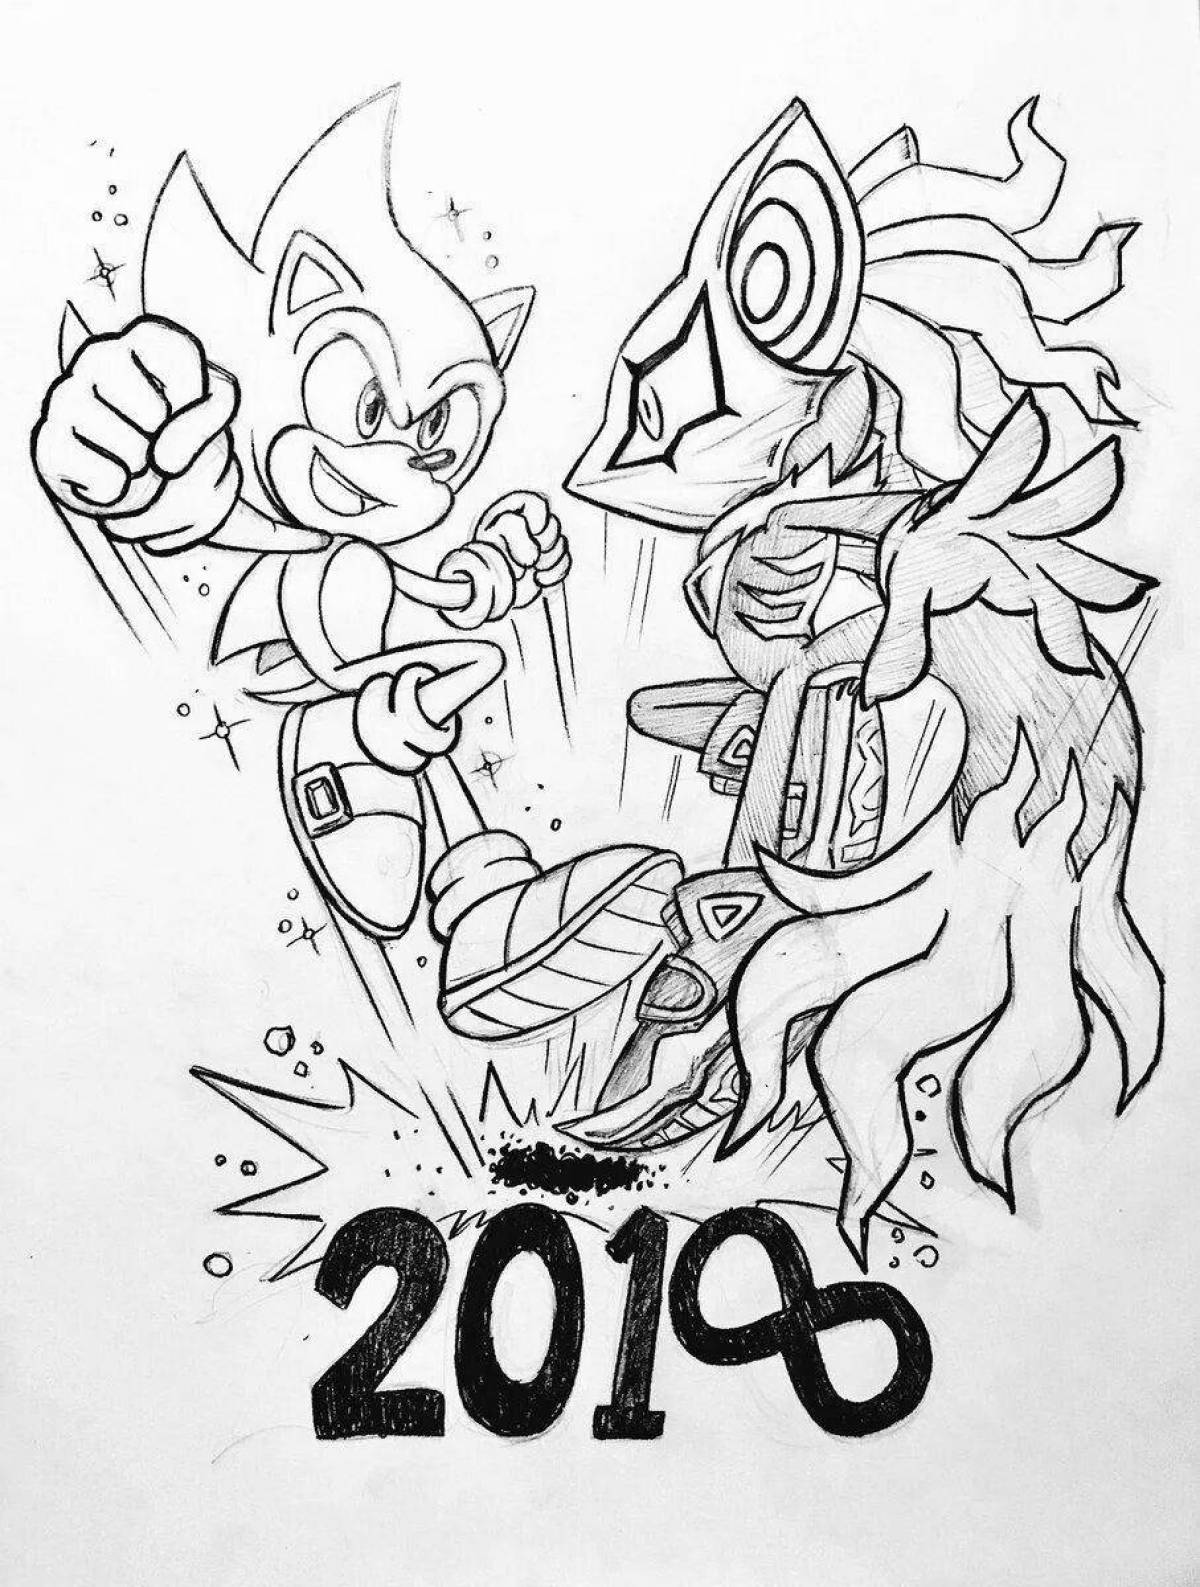 Cool infinity sonic coloring page